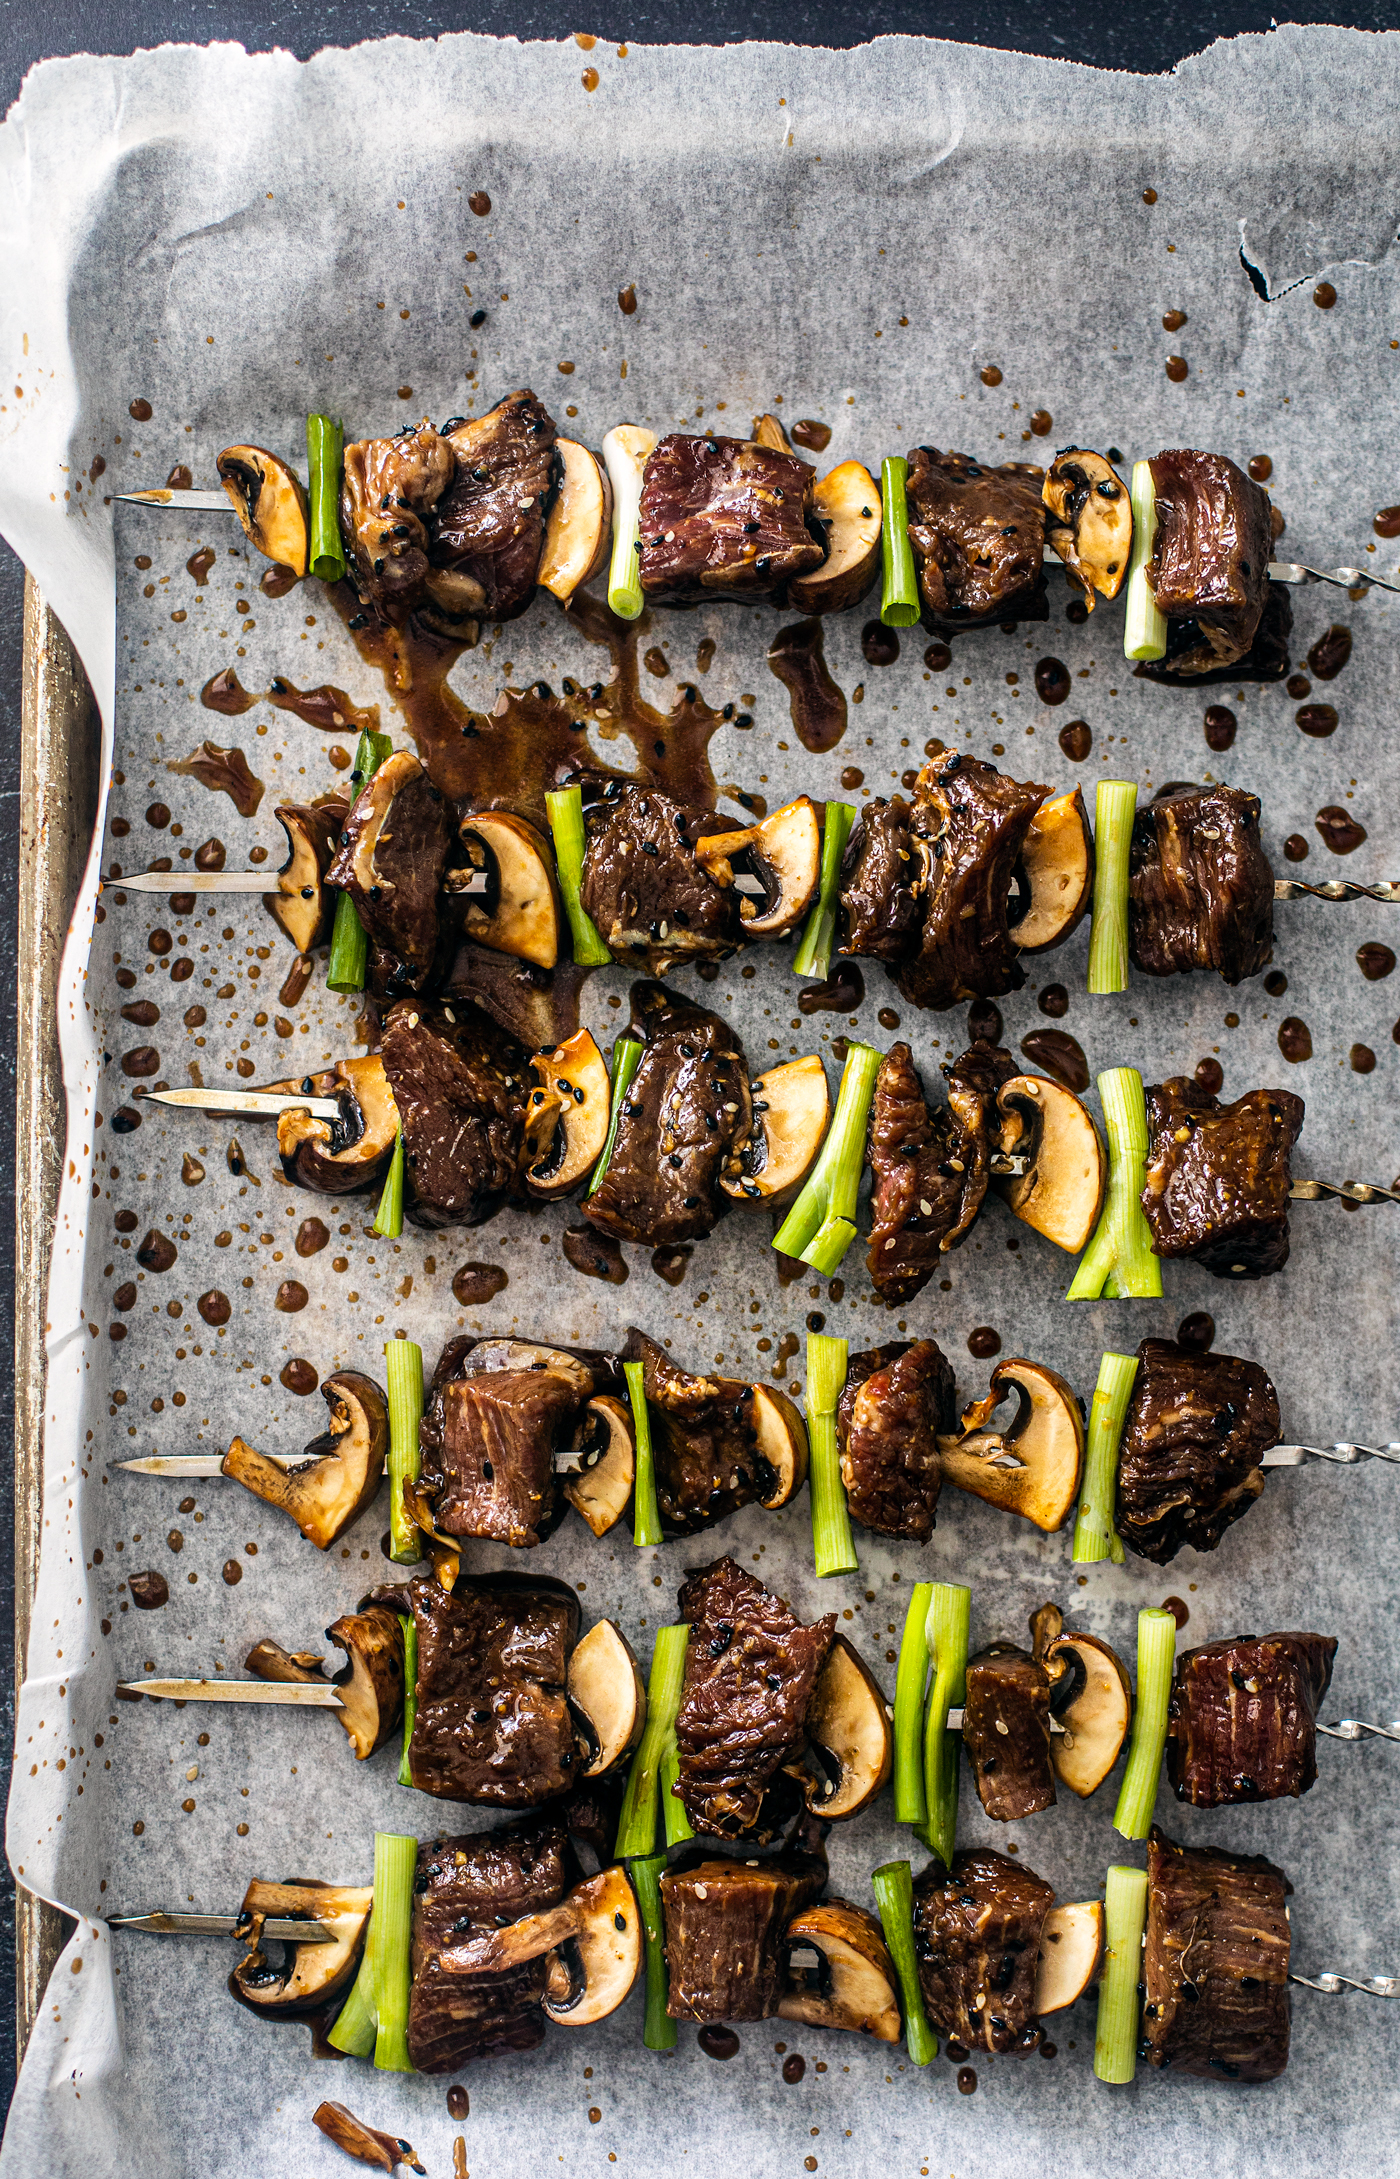 Overhead shot of skewers with beef, scallions, and mushrooms on parchment.